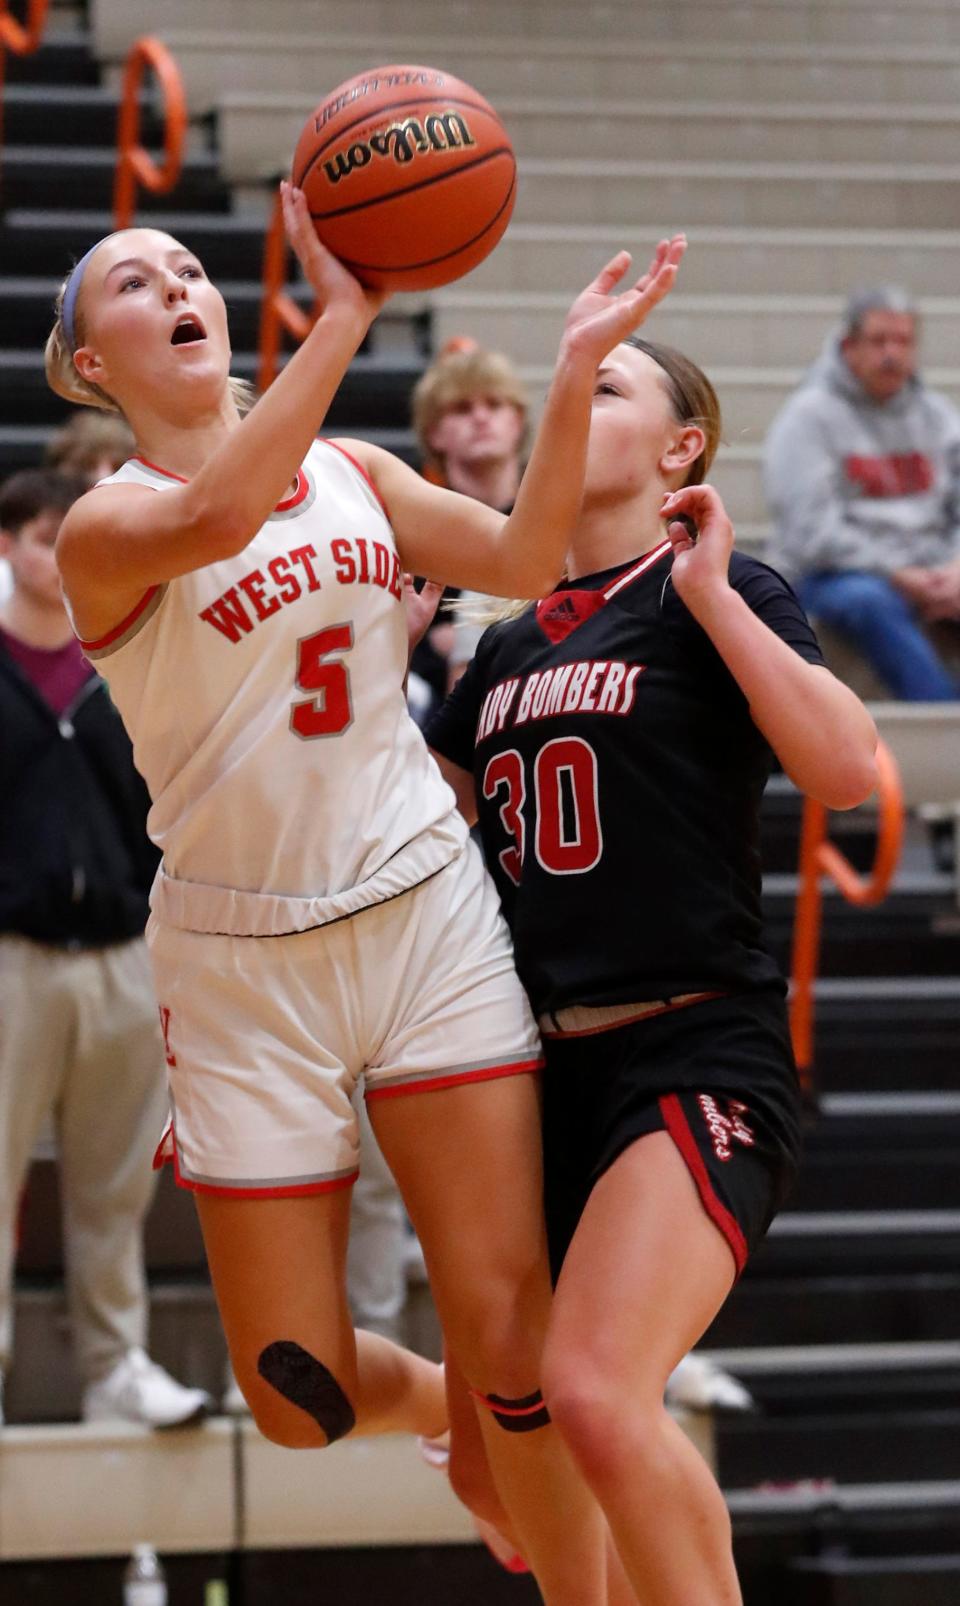 West Lafayette Red Devils Sarah Werth (5) shoots the ball while being guarded by Rensselaer Central Bombers Kamri Rowland (30) during the IU Health Hoops Classic Girl’s Basketball Championship, Saturday, Nov. 18, 2023, at Harrison High School in West Lafayette, Ind. Rensselaer Central Bombers won 58-53.